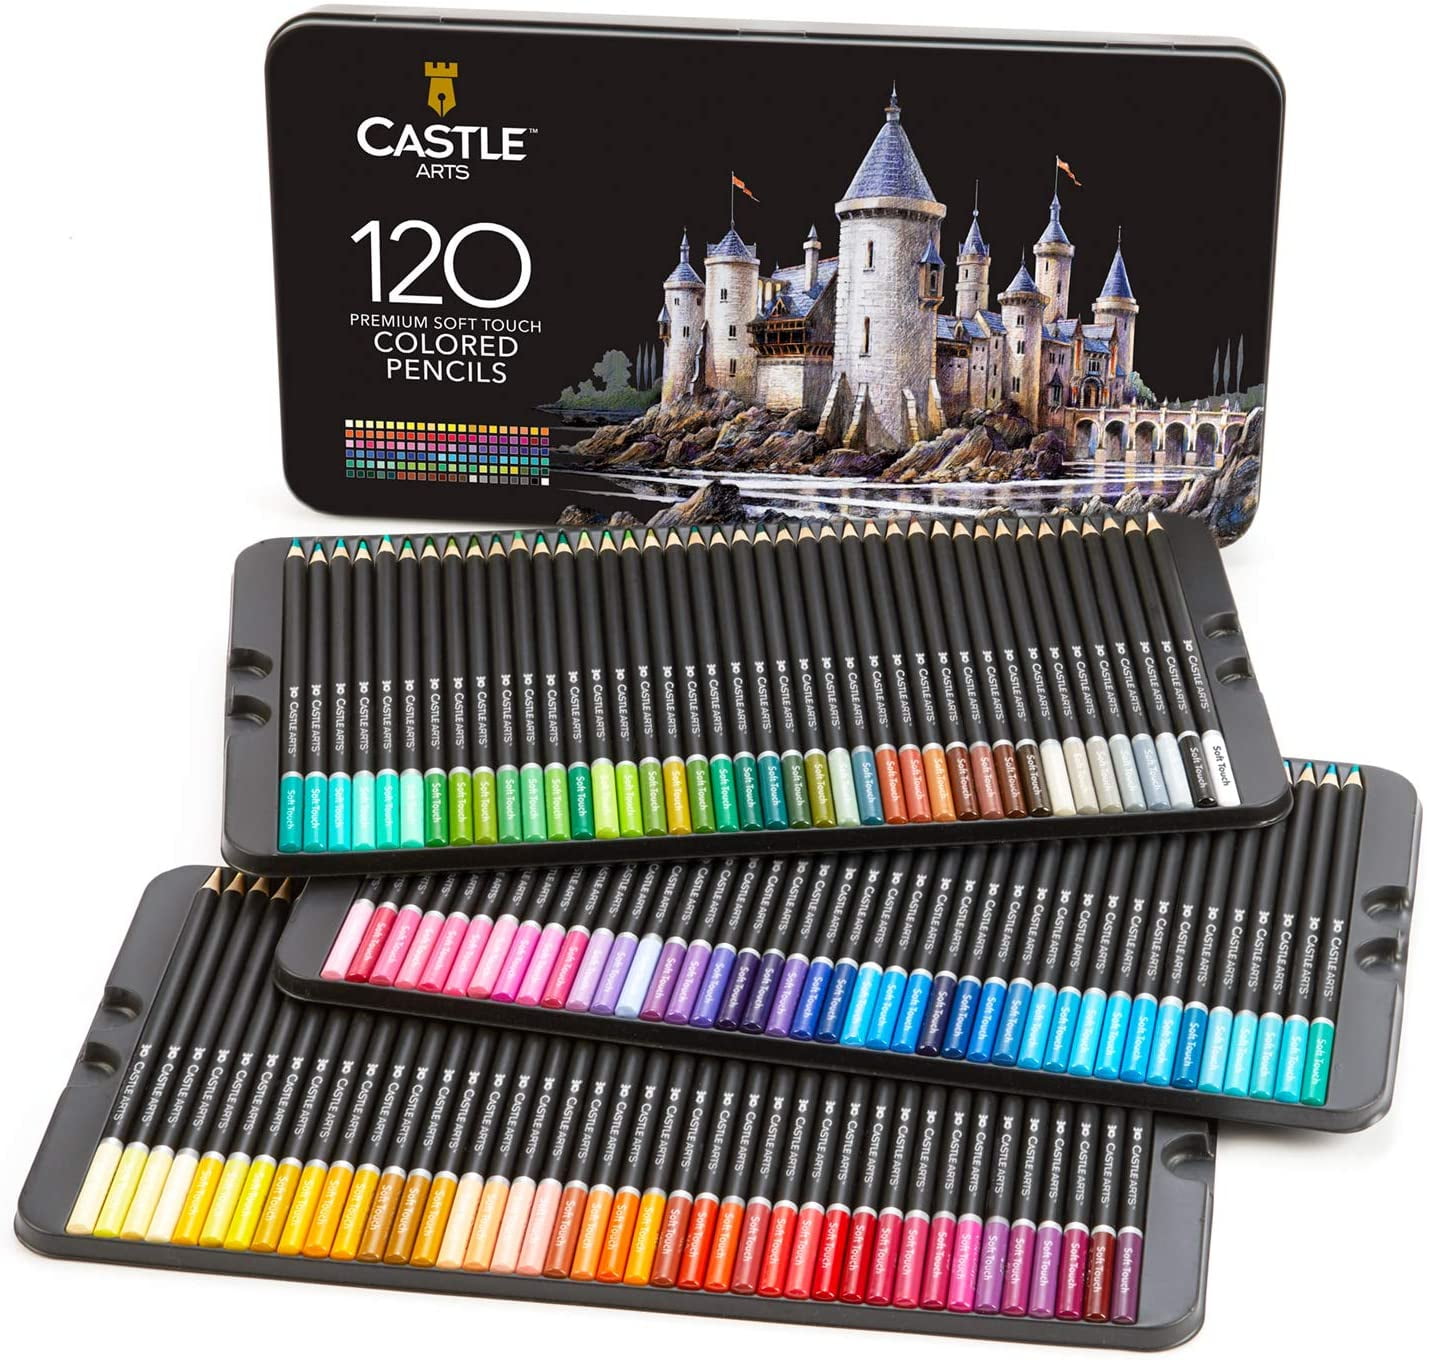 Cra-Z-Art Colored Pencils, 12 Count, Beginner Child to Adult, Back